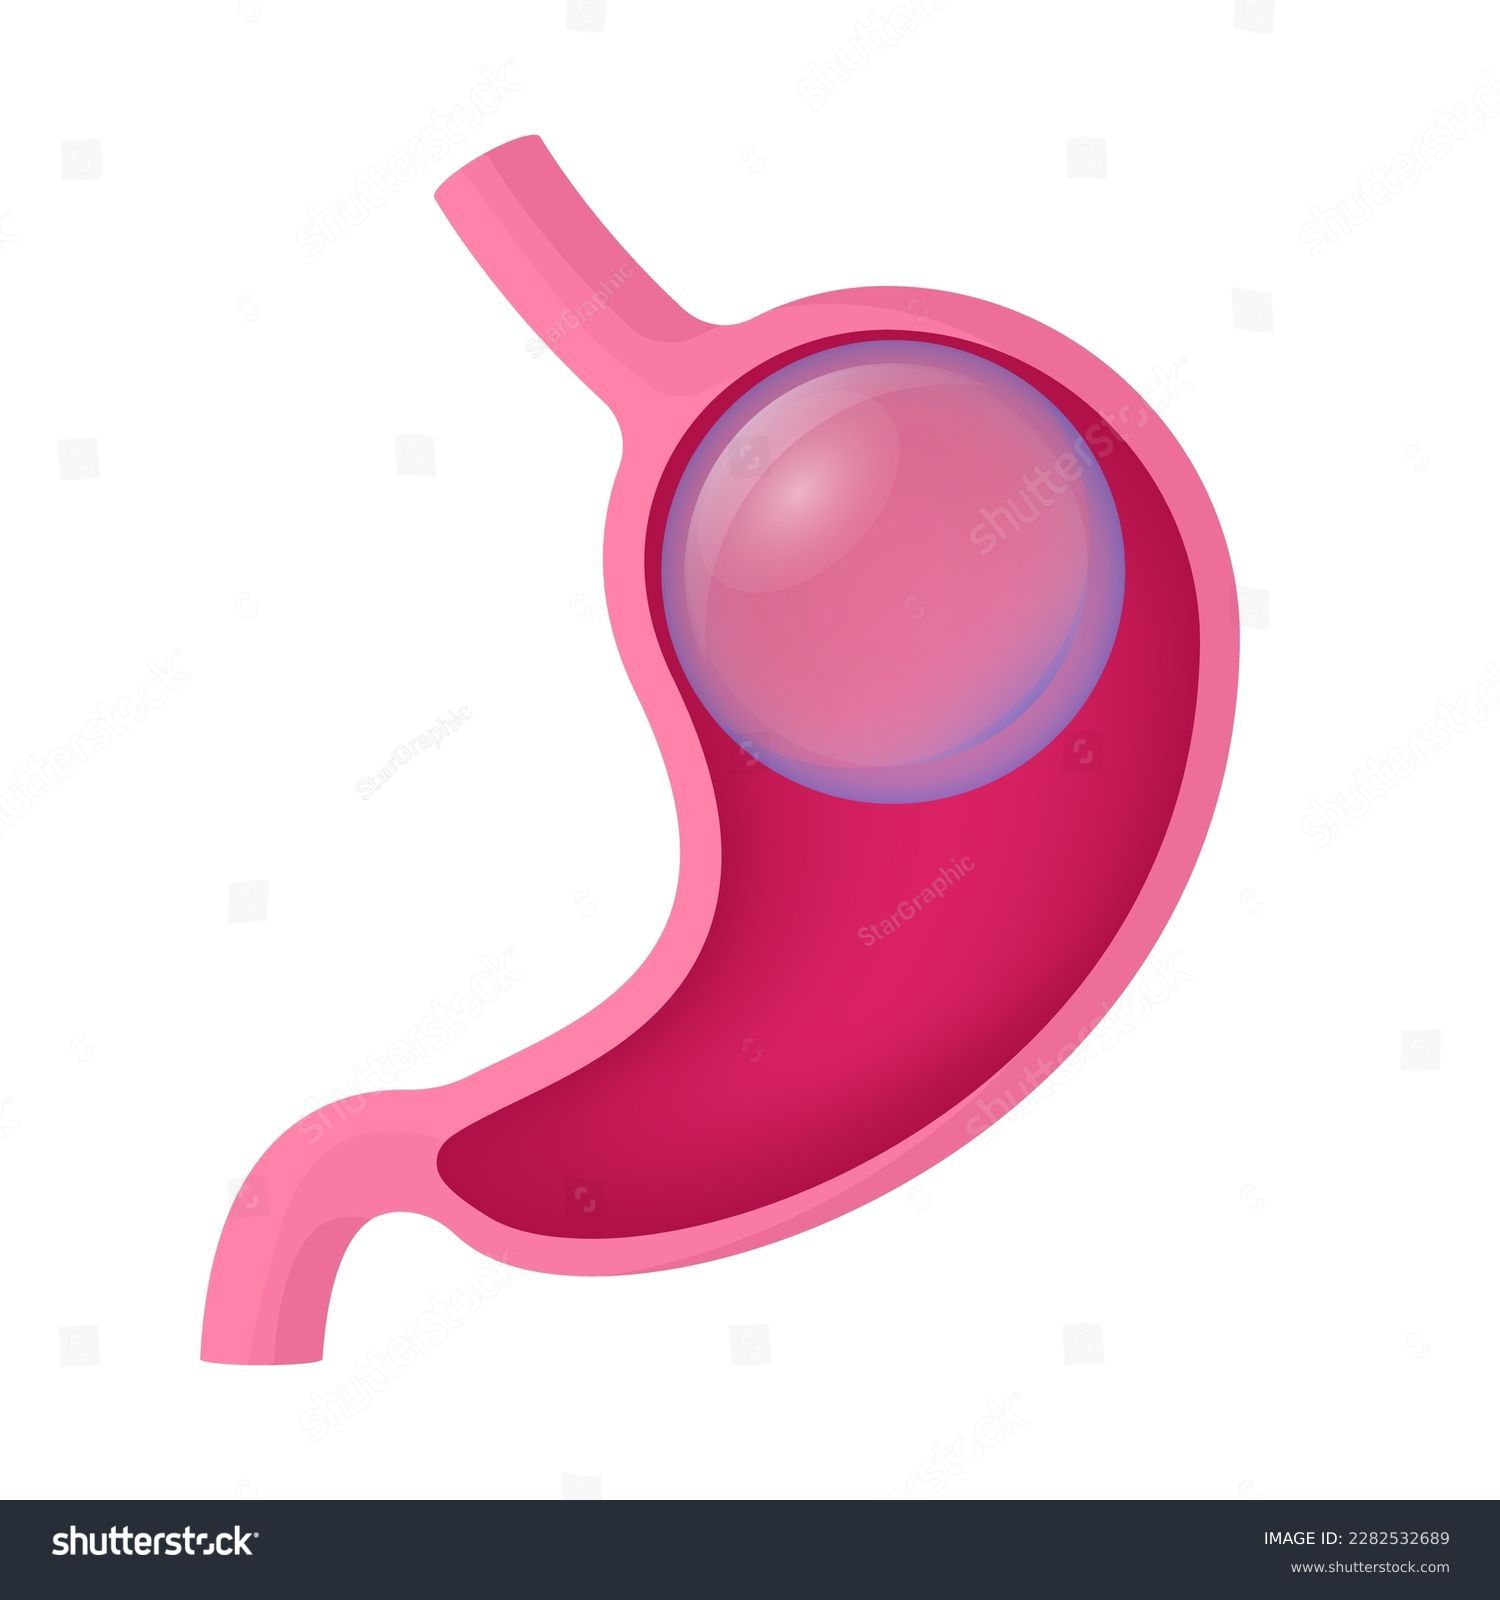 SVG of Gastric balloon weight loss. Installation of a gastric balloon into stomach. Methods of weight loss surgery. Human anatomy. Vector illustration. svg